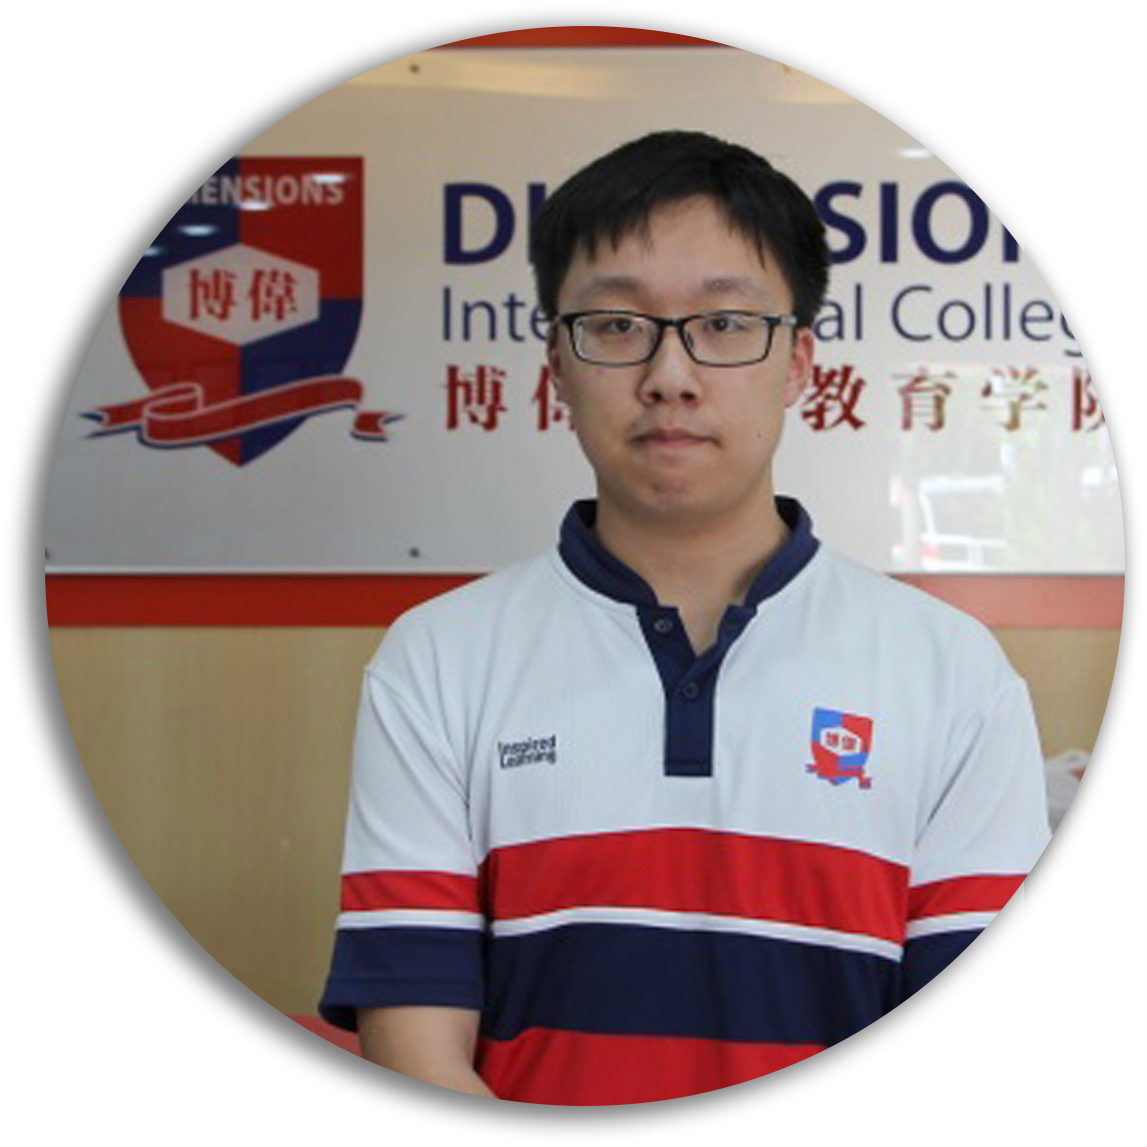 Yao XinQi - Cambridge student at DIMENSIONS Singapore